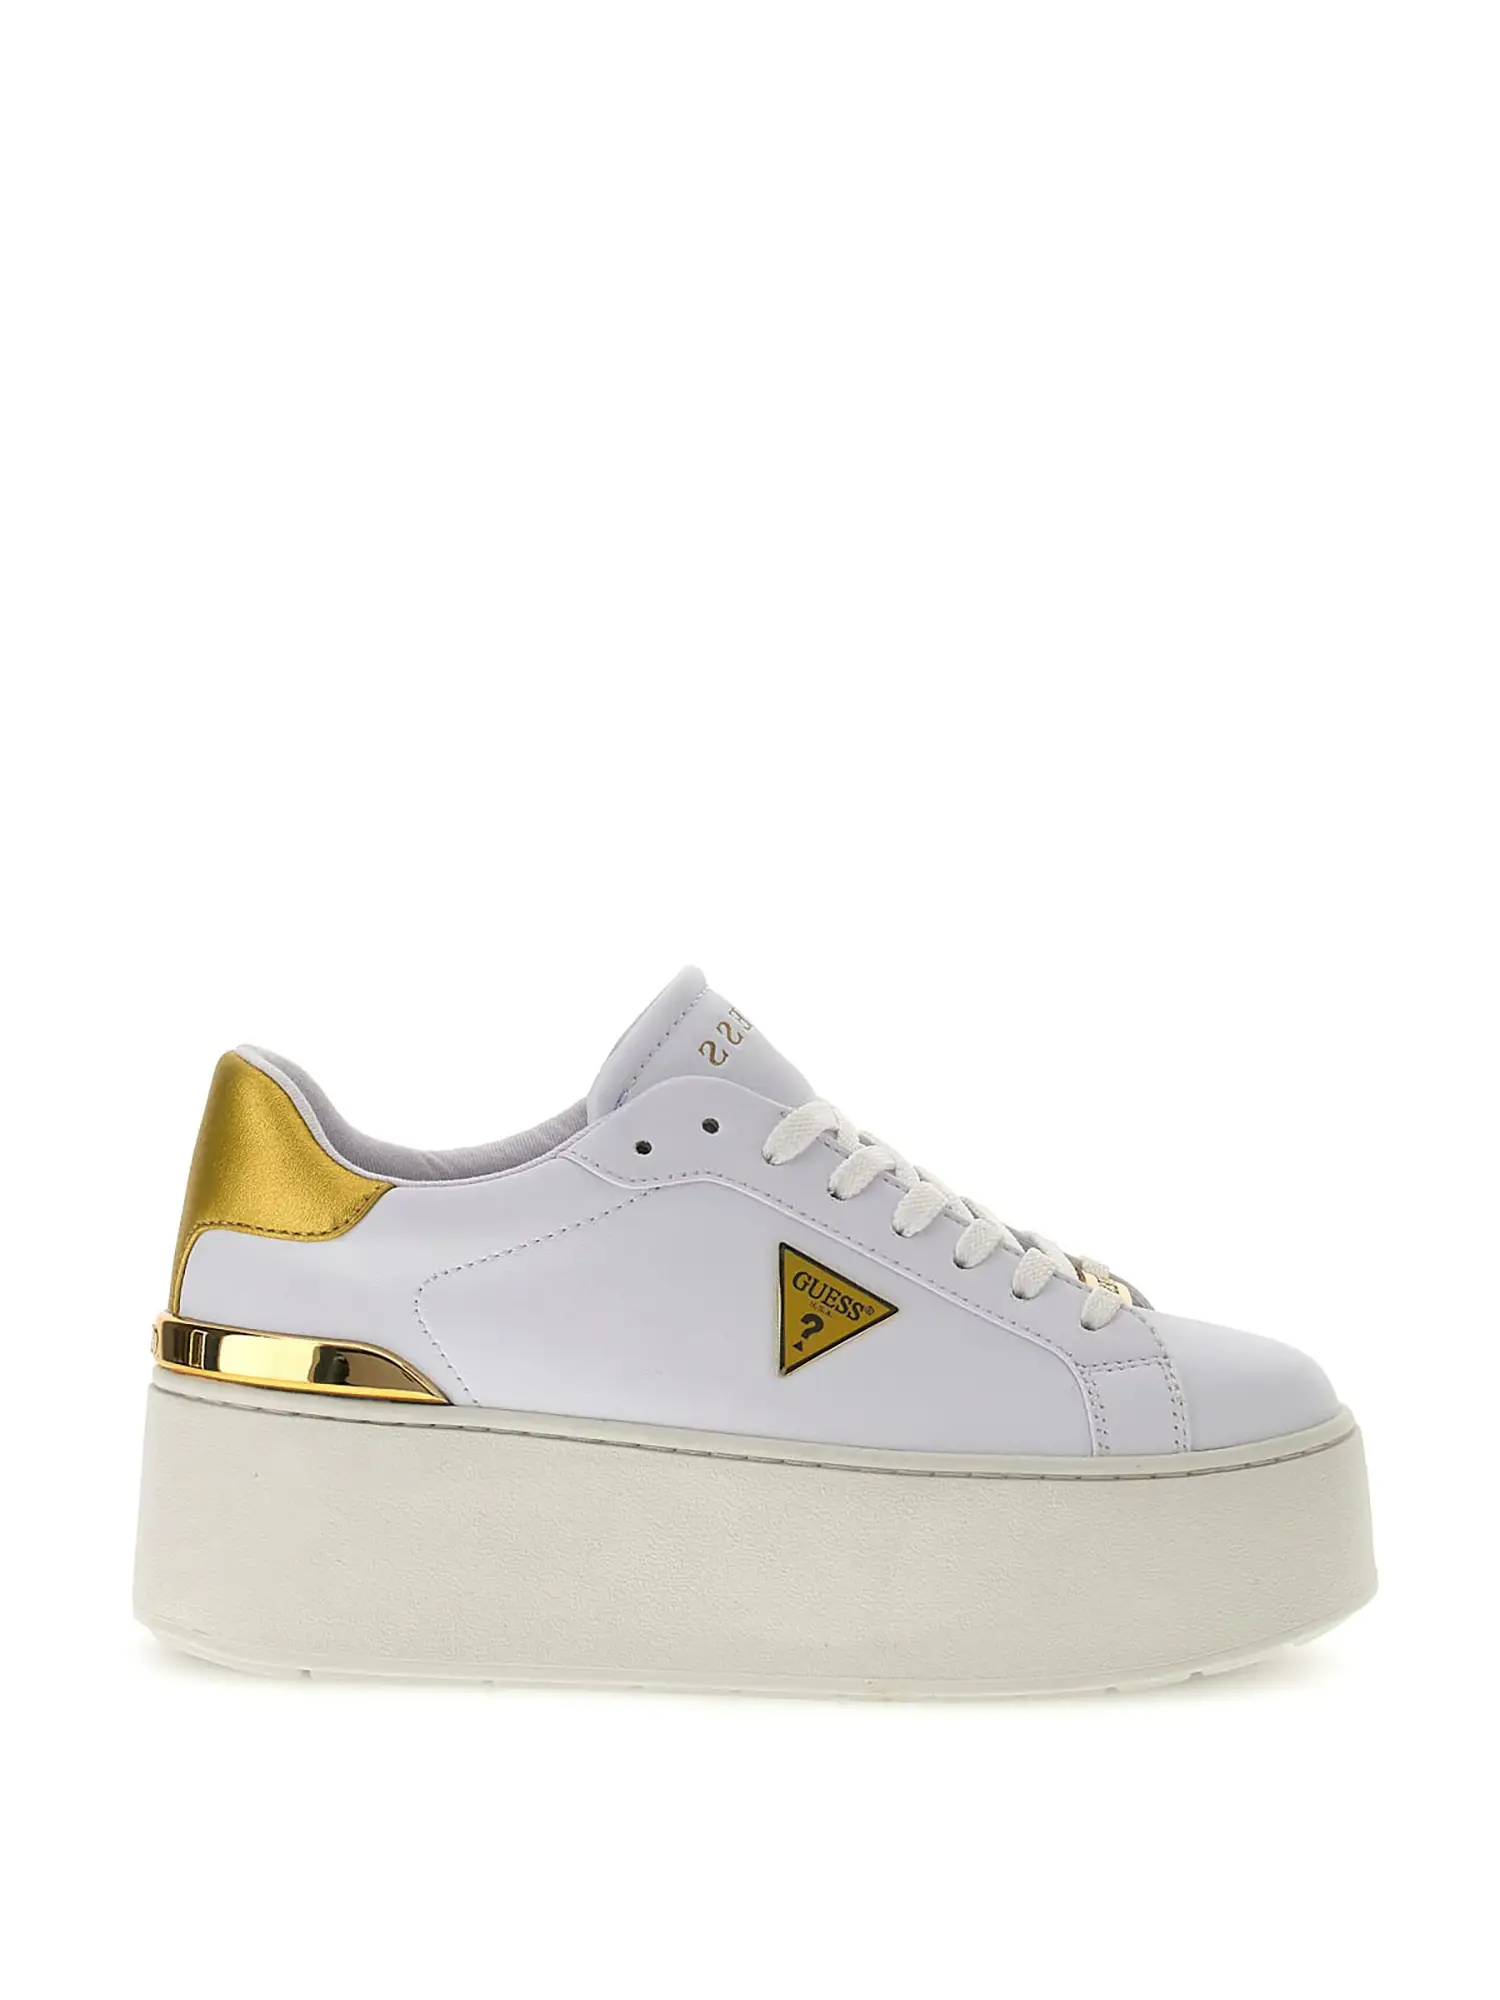 SNEAKERS DONNA - GUESS - FLPWLL LEL12 - BIANCO/ORO, 37